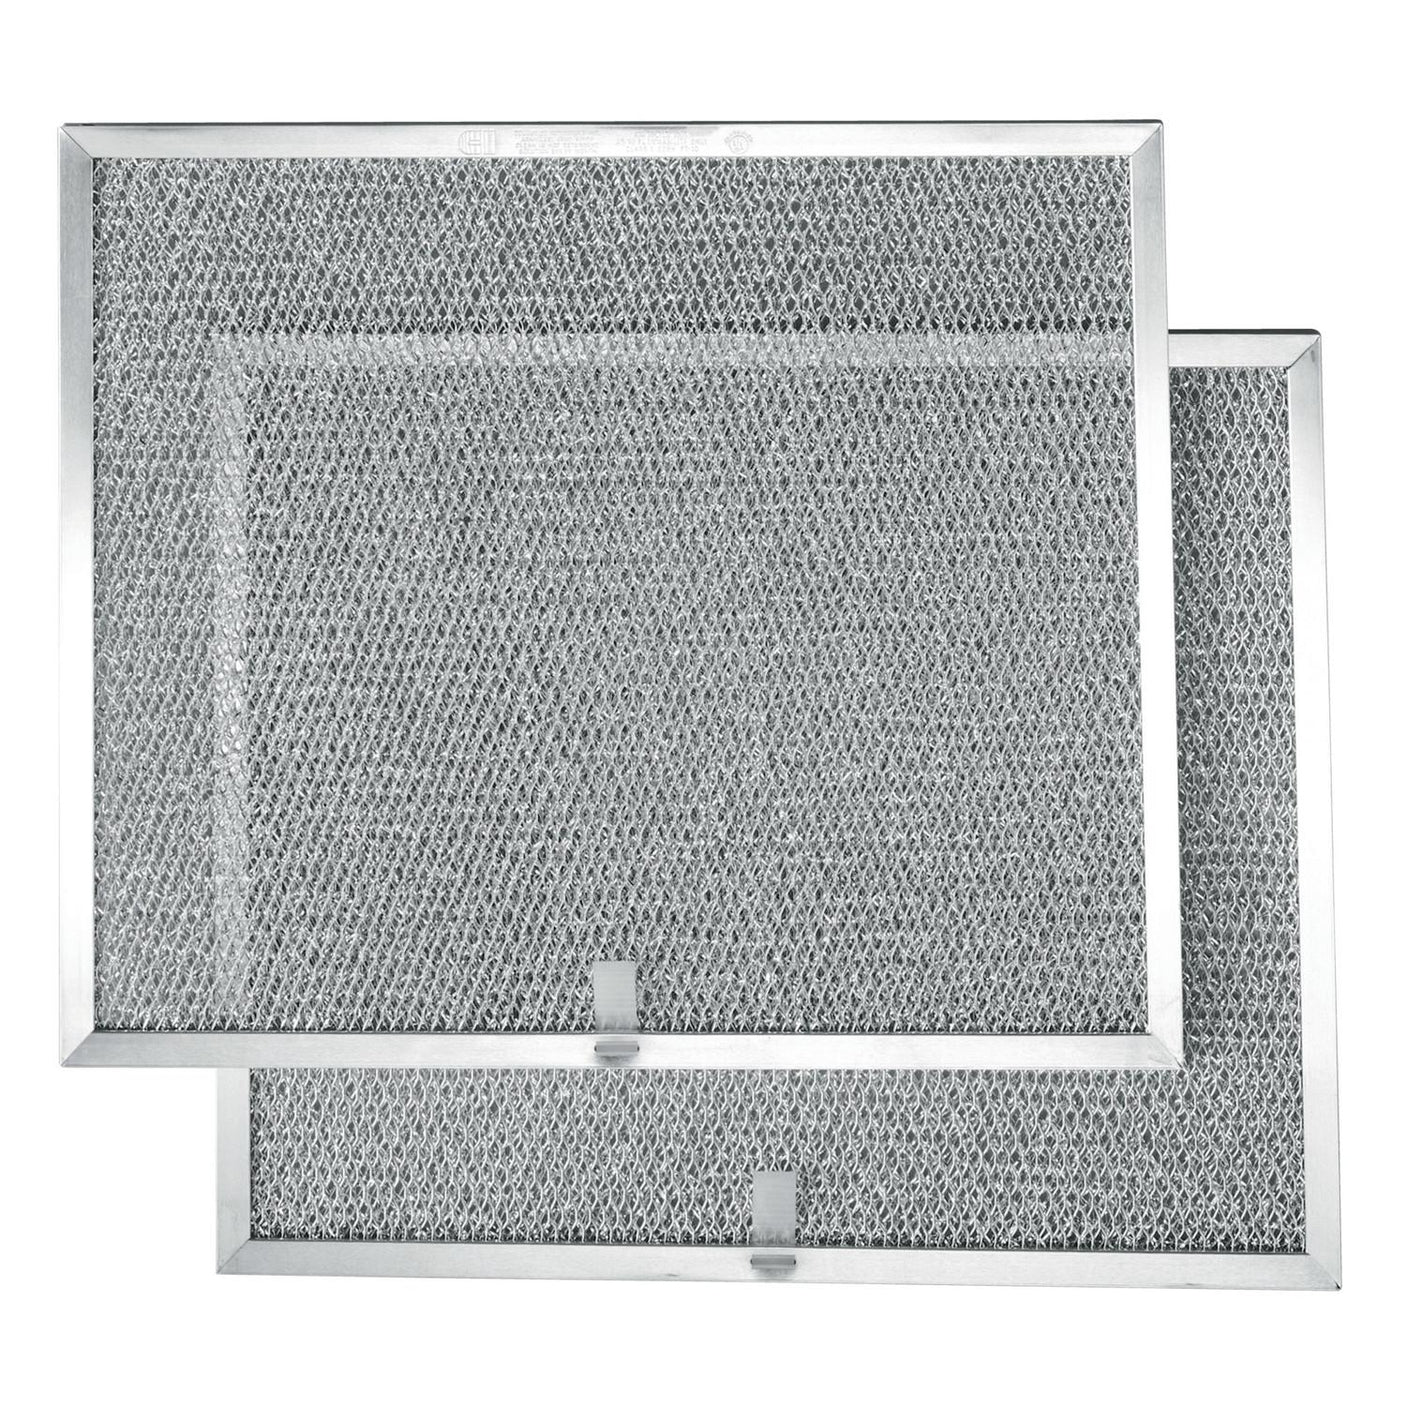 Broan-NuTone® Genuine Replacement Aluminum Filter for Range Hoods, 14-3/8" X 11-7/8", Fits Select Models, 2-Pack